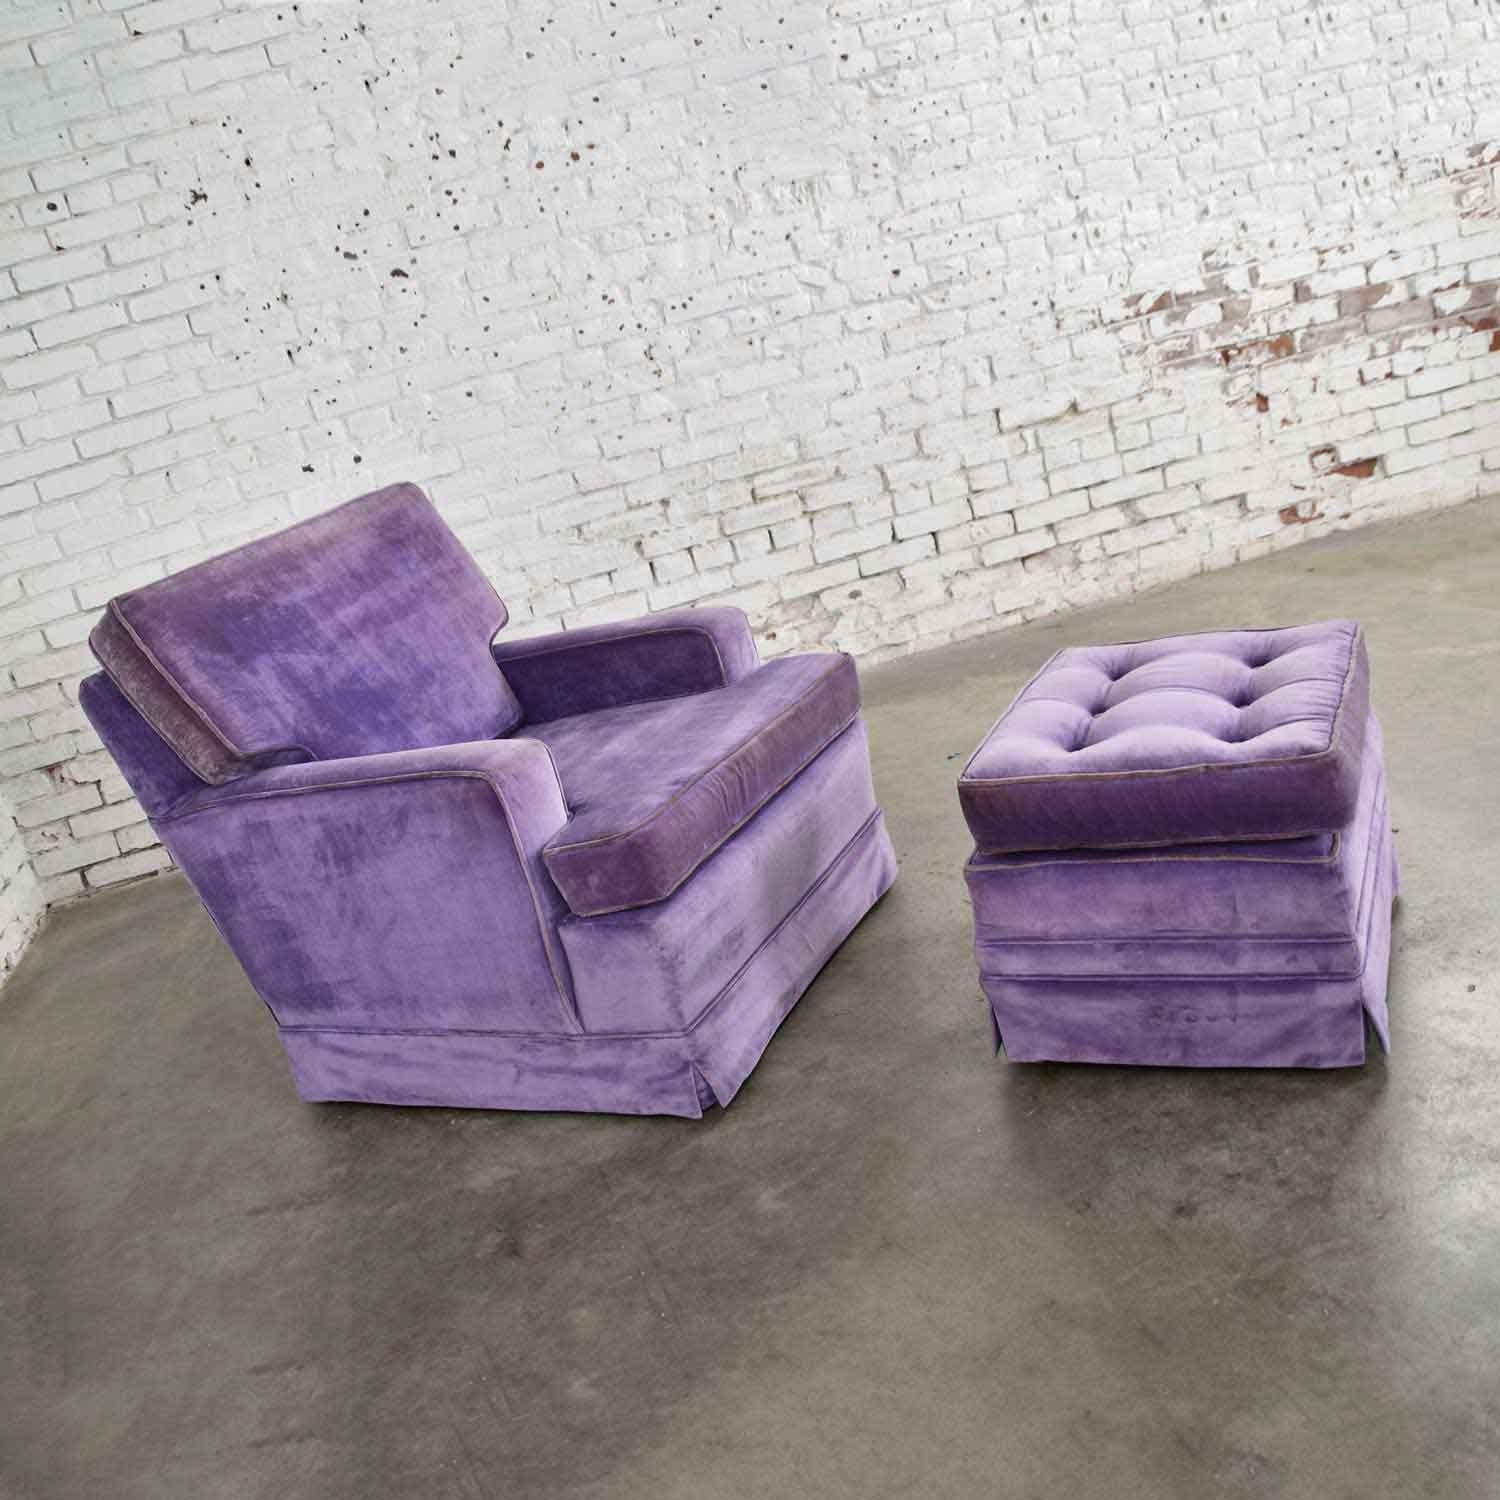 Charming purple velvet Mid-Century Modern Lawson style vintage club chair and matching ottoman with button tufted design and loose top cushion. Wonderful age-appropriate condition. The foam in back has been replaced. The fabric is perfectly aged and